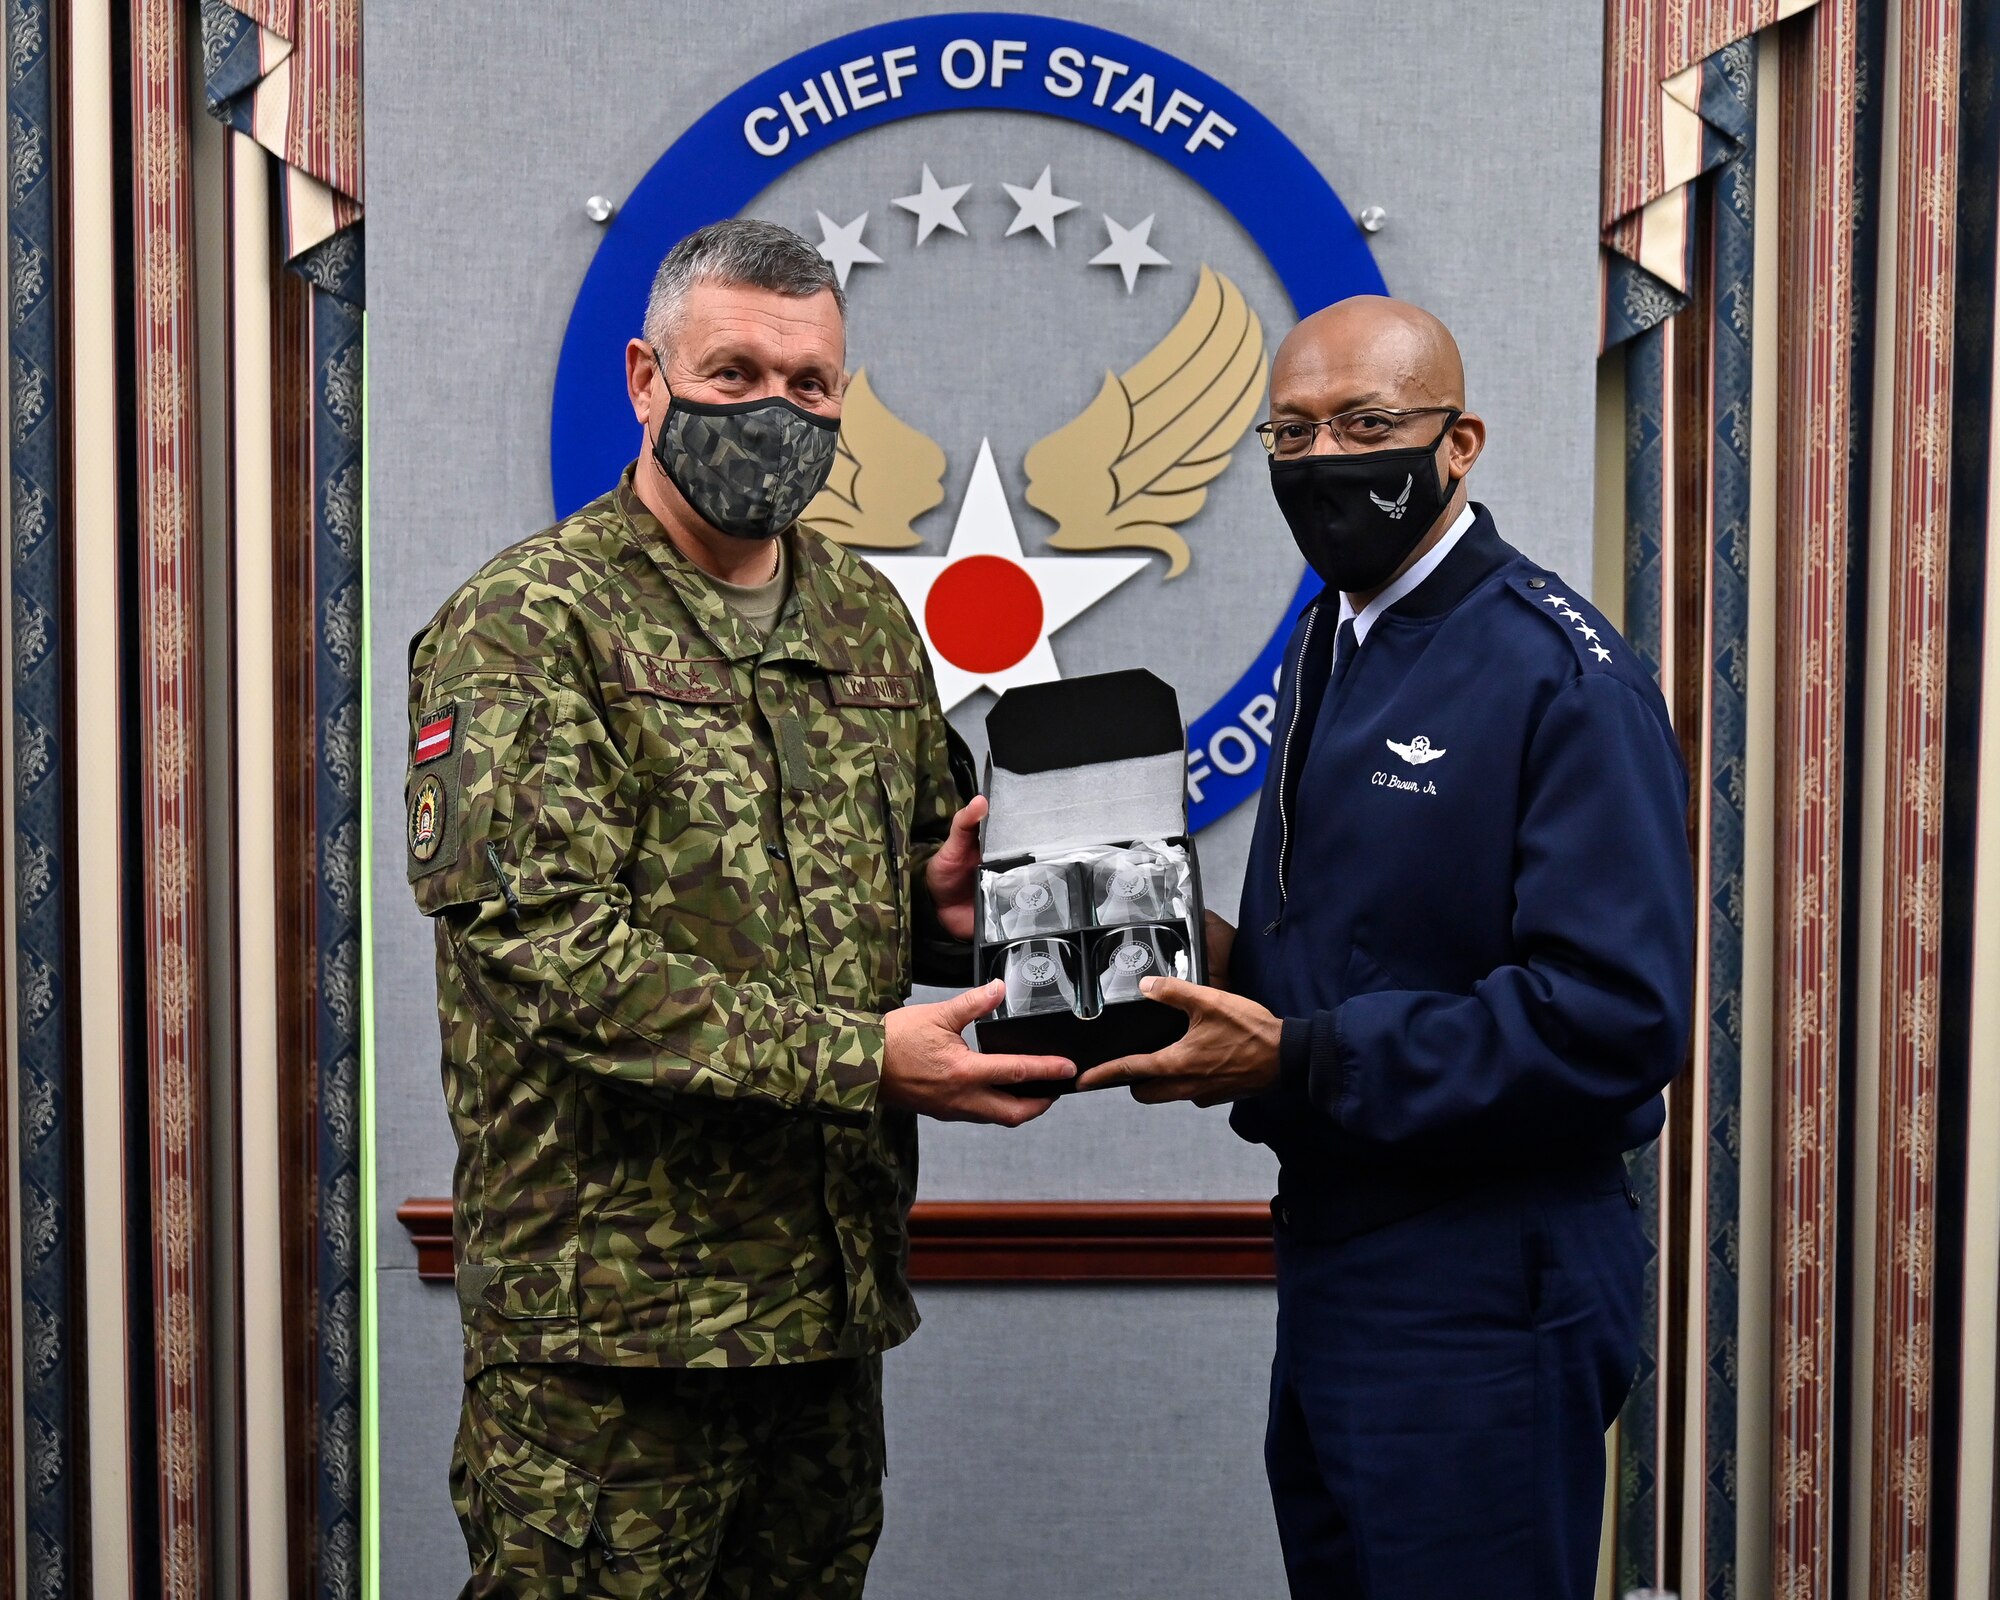 Air Force Chief of Staff Gen. CQ Brown, Jr. poses with Lt. Gen. Leonids Kalnins, Latvia chief of defense